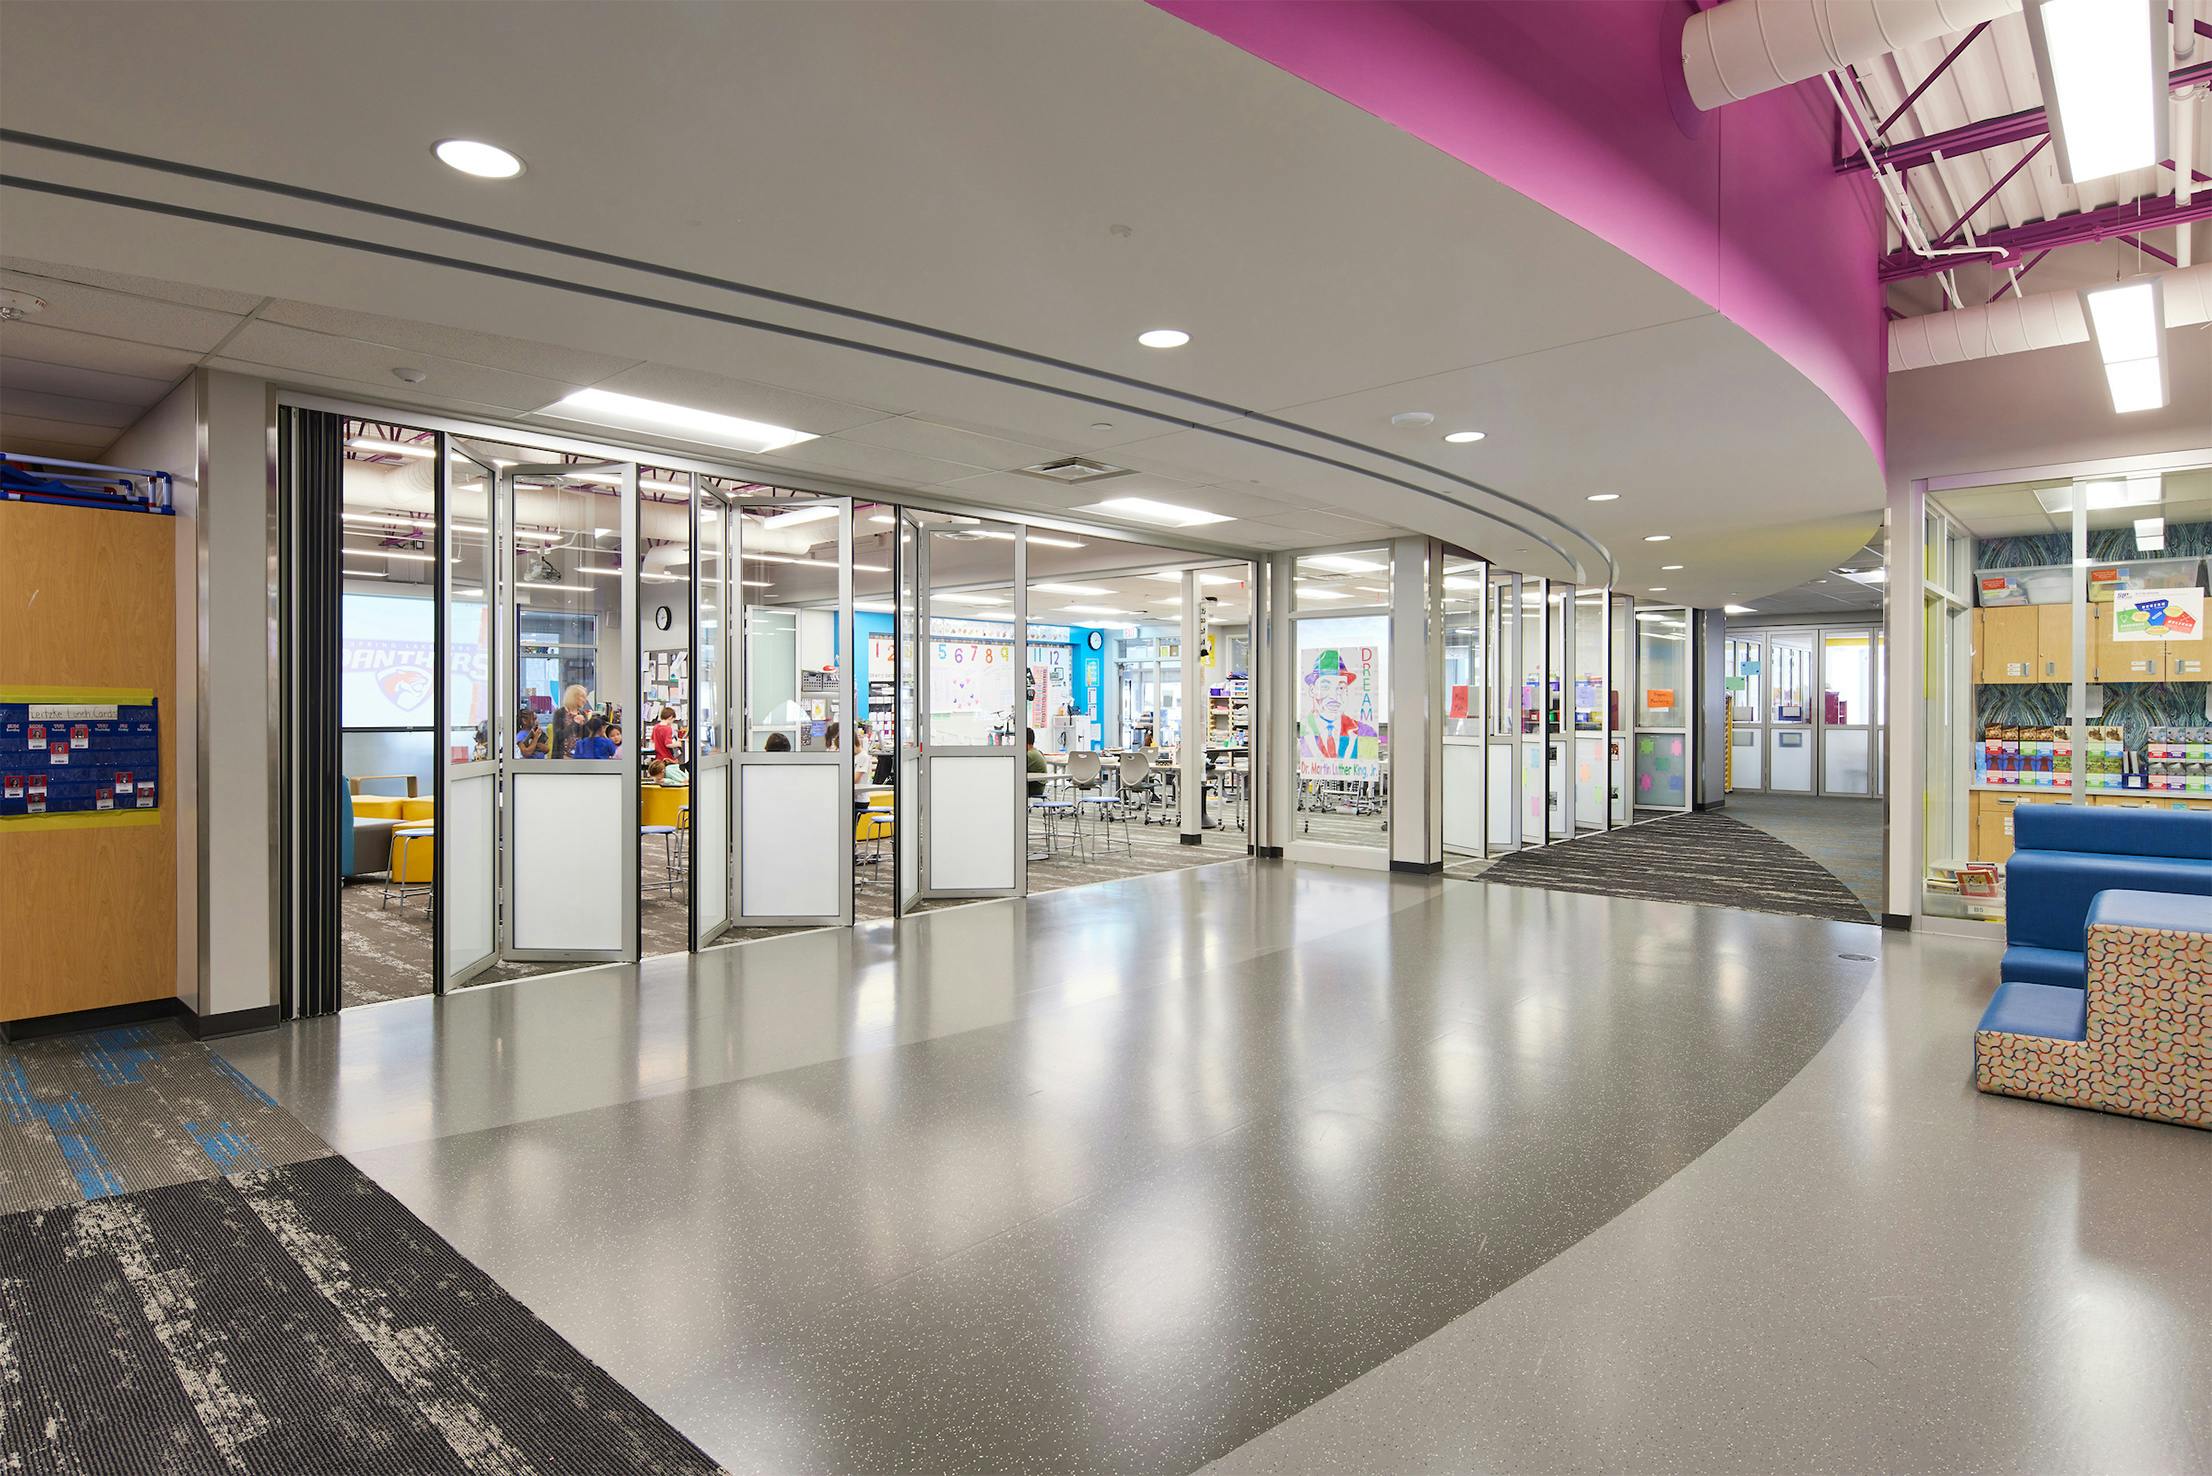 retractable glass wall systems for schools